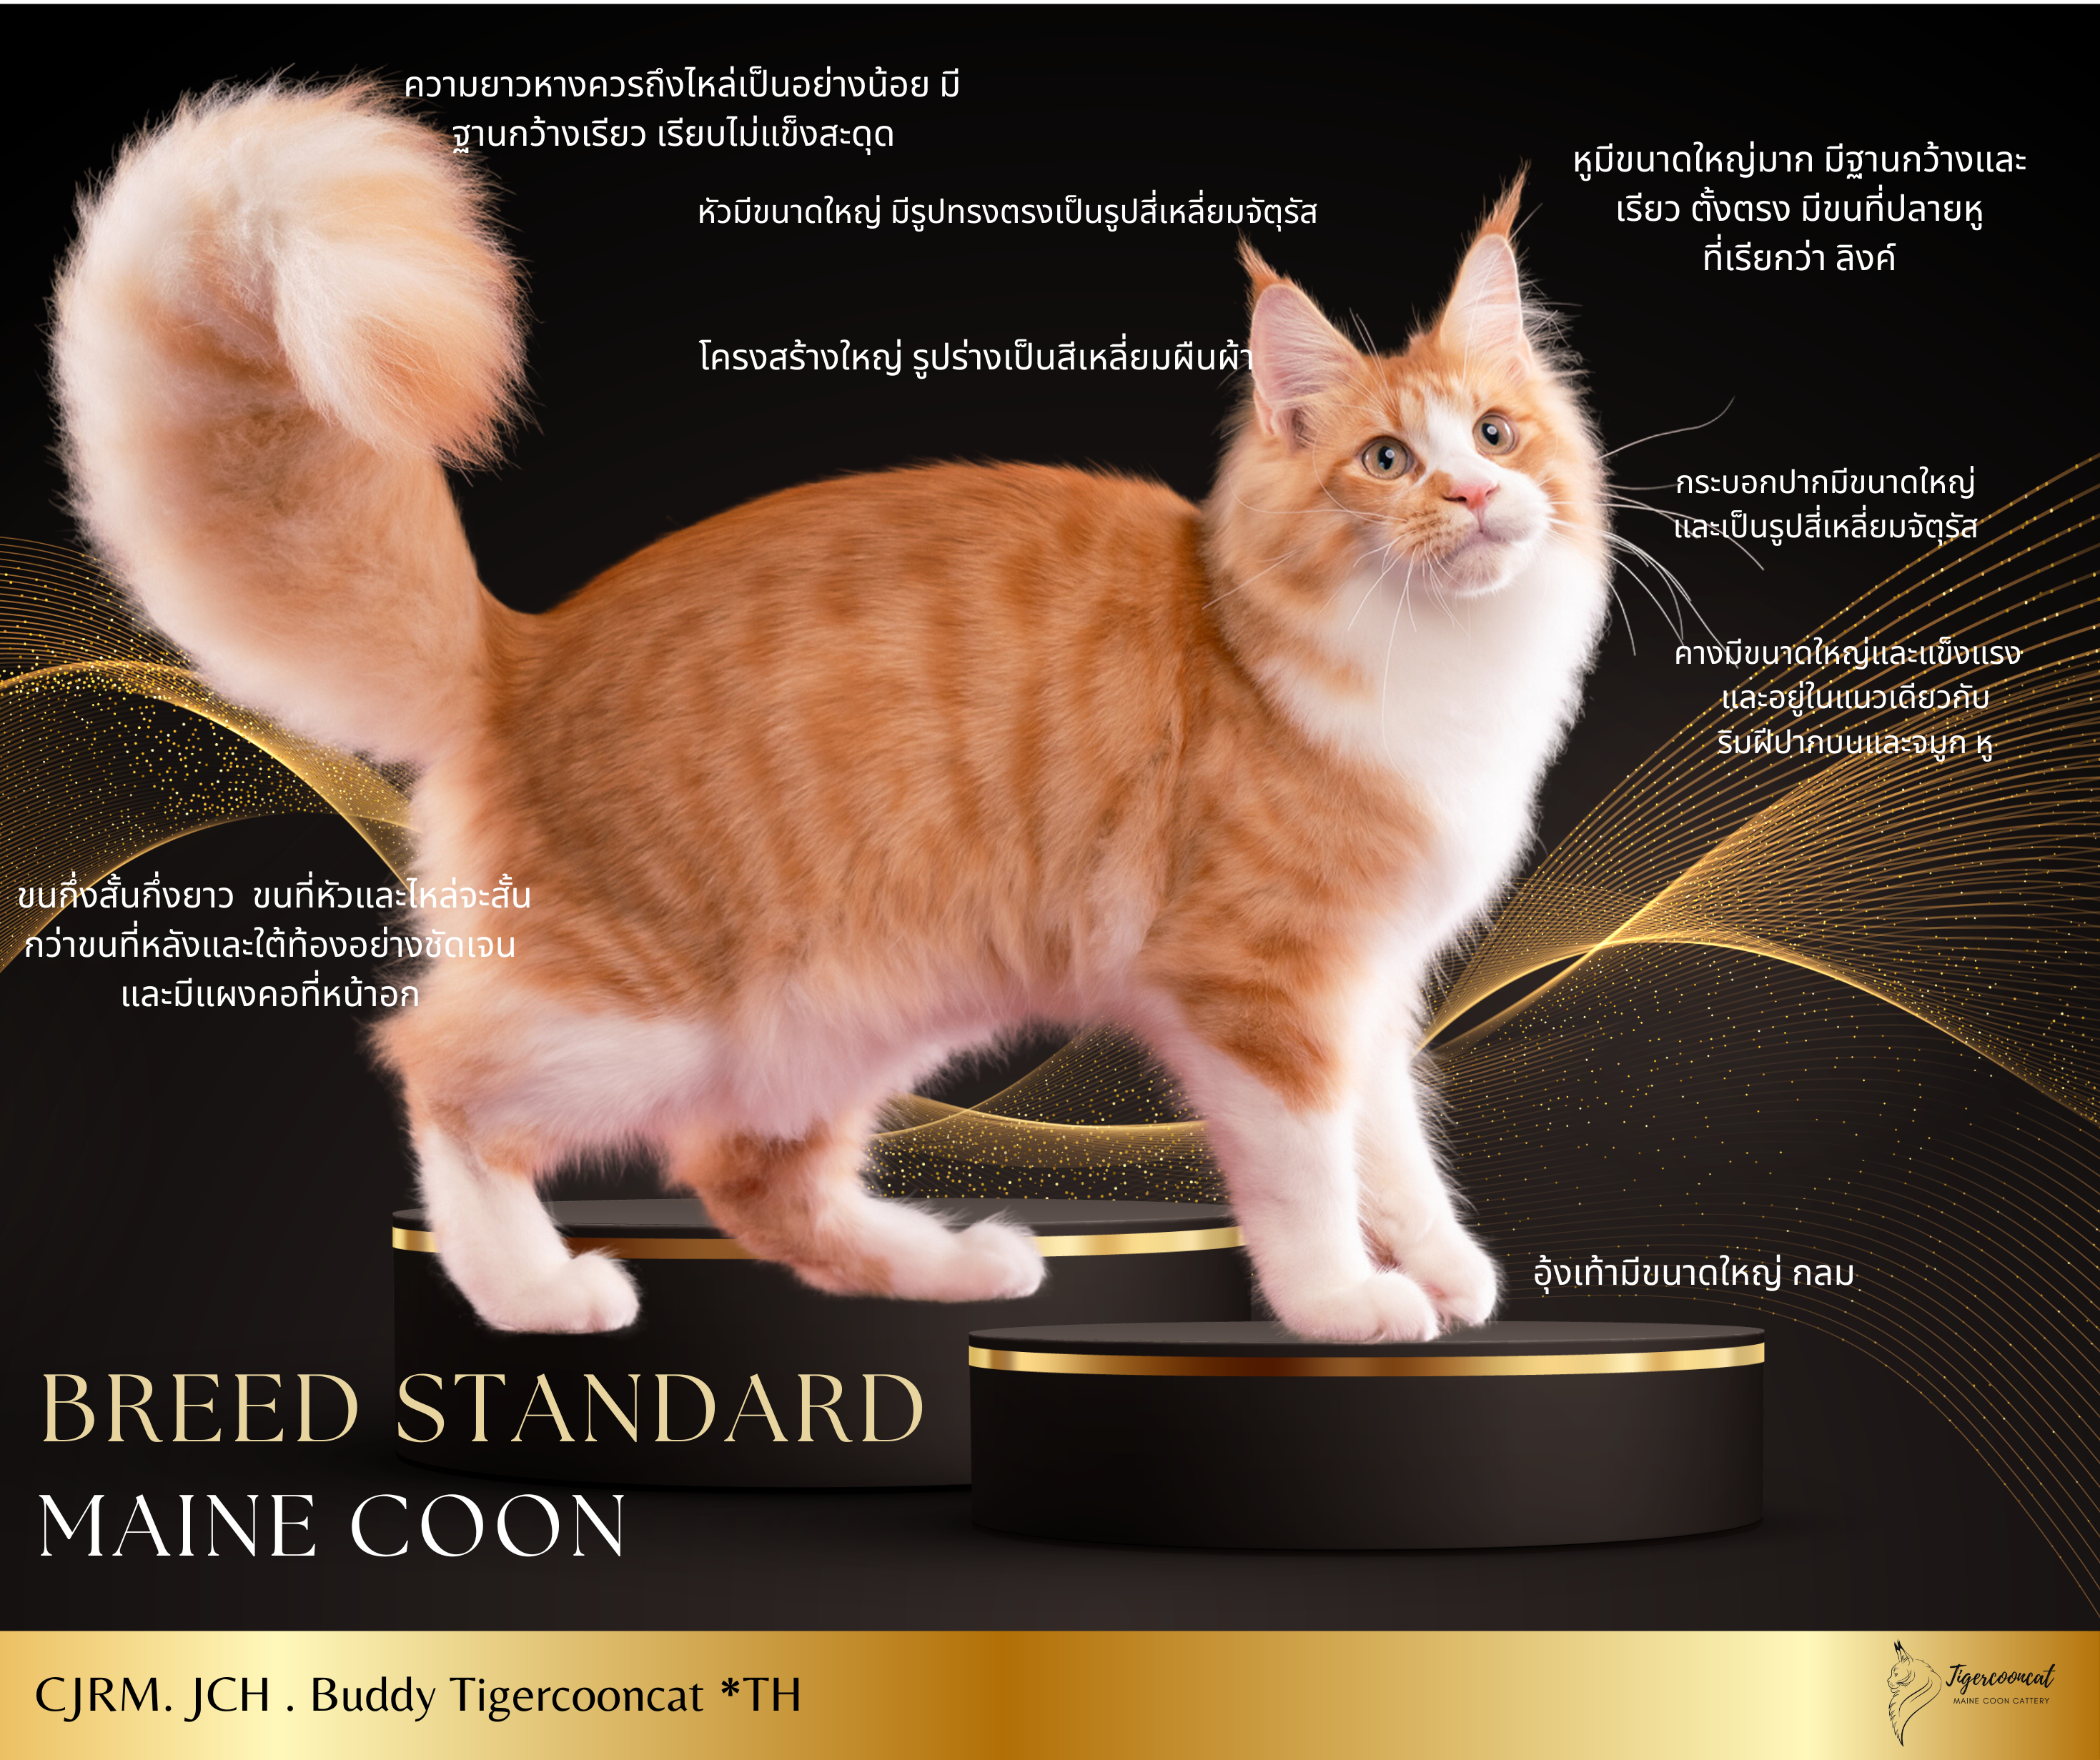 Maine coon, เมนคูน,แมวเมนคูน, เมนคูนแท้ ,ลักษณะMainecoon ,mainecoonthailand 